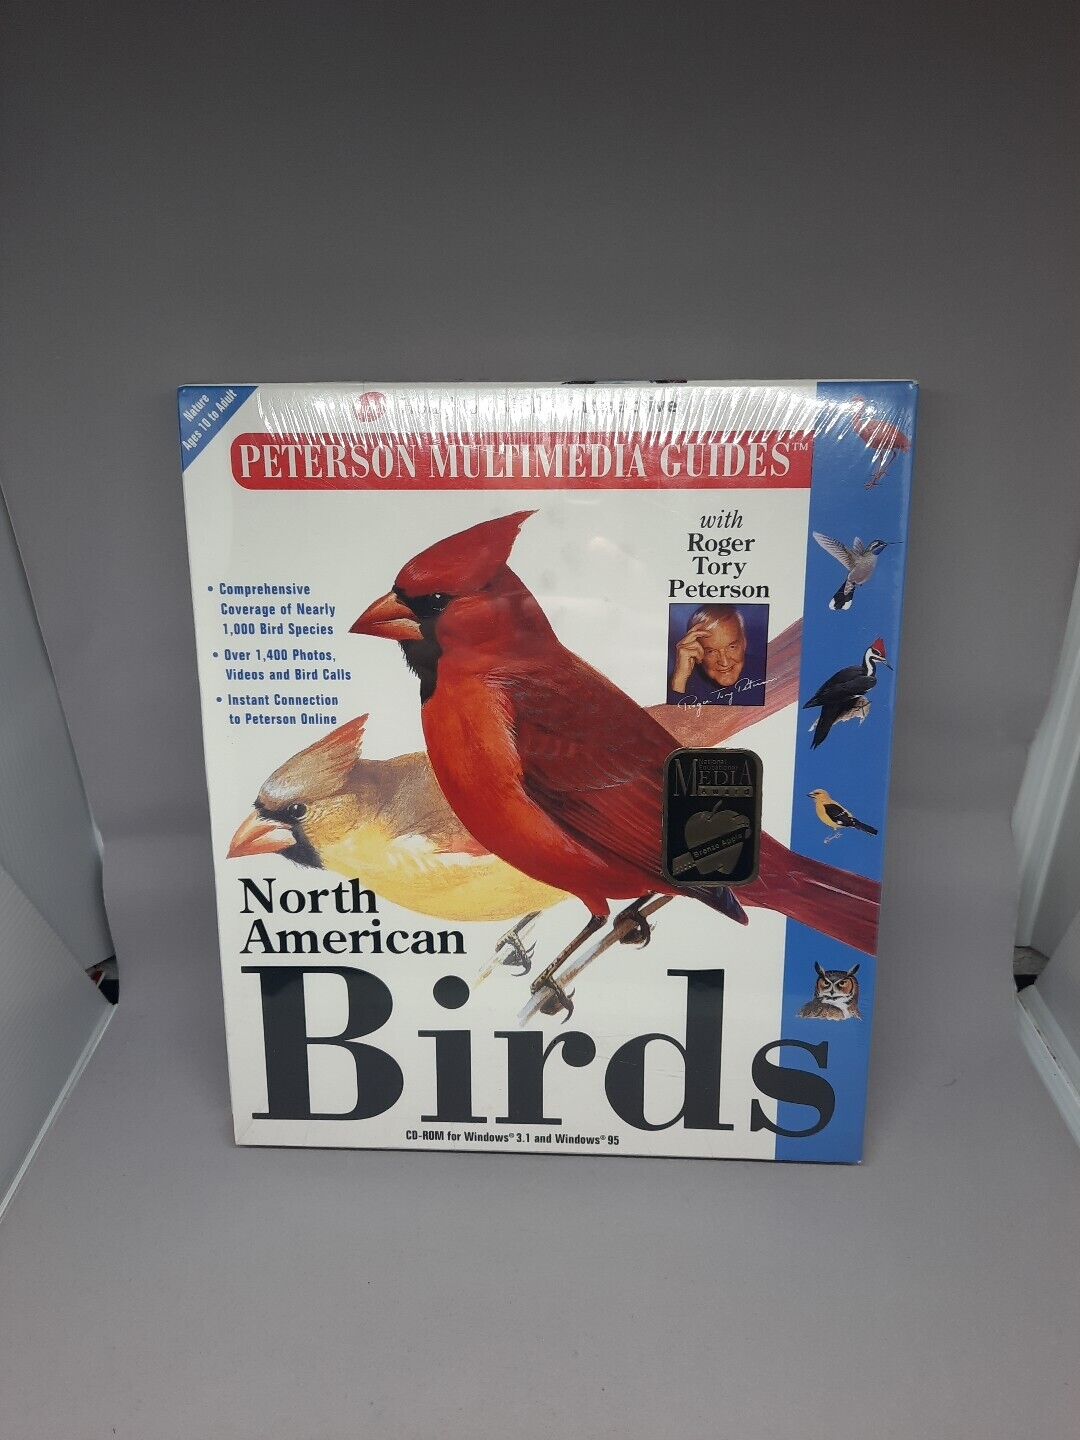 North American Birds Peterson Multimedia Guides CD Rom Windows 95 98 PC Sealed